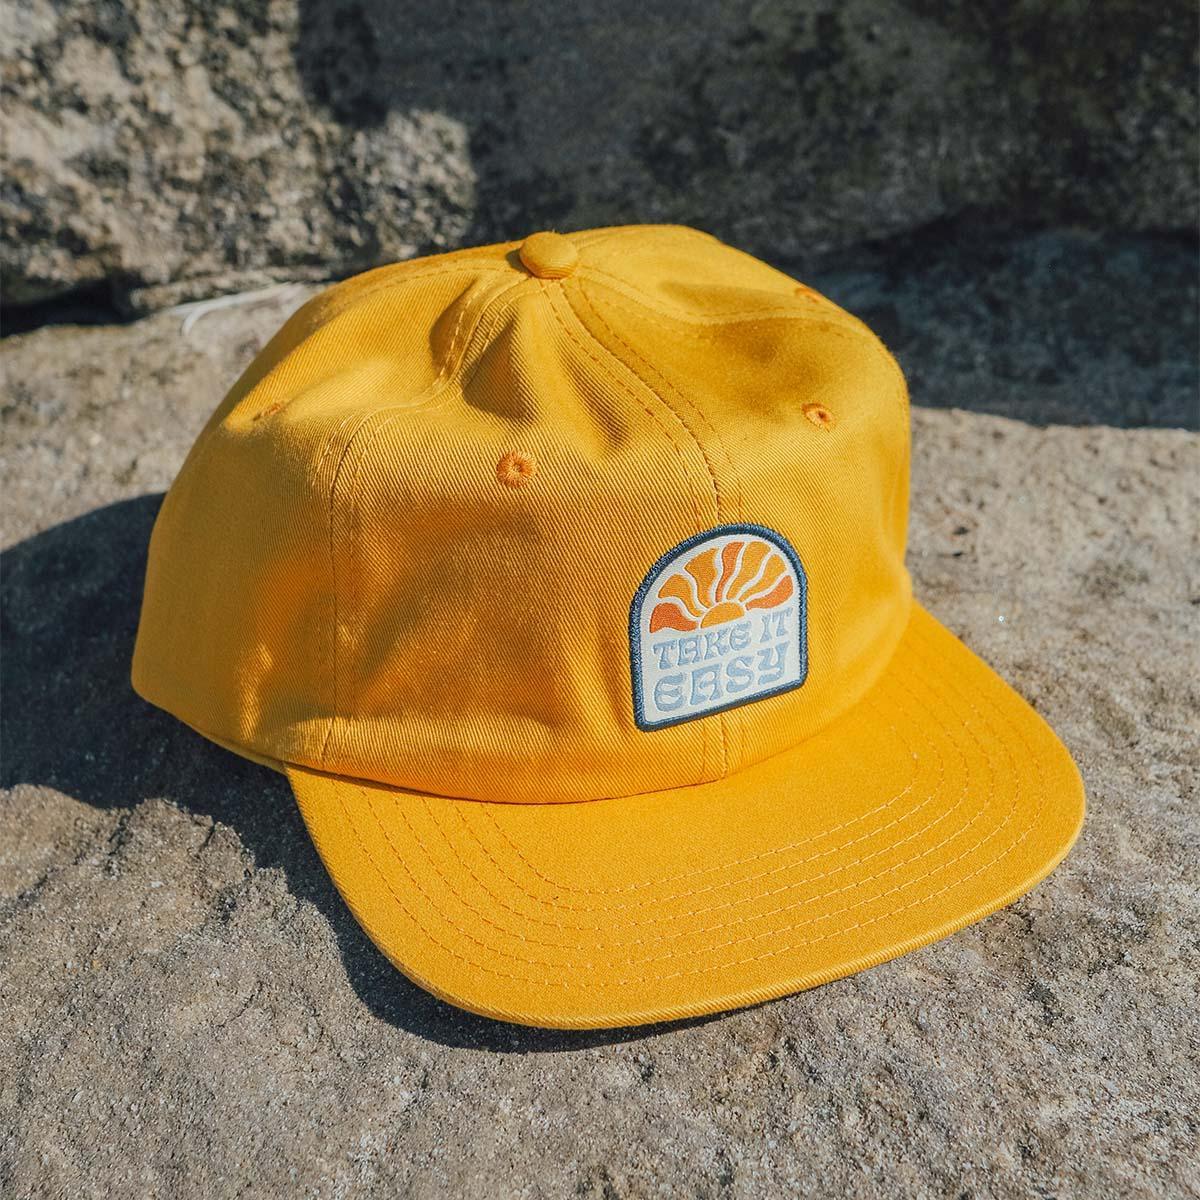 Take It Easy Hat. Hats Happiness. Trek For